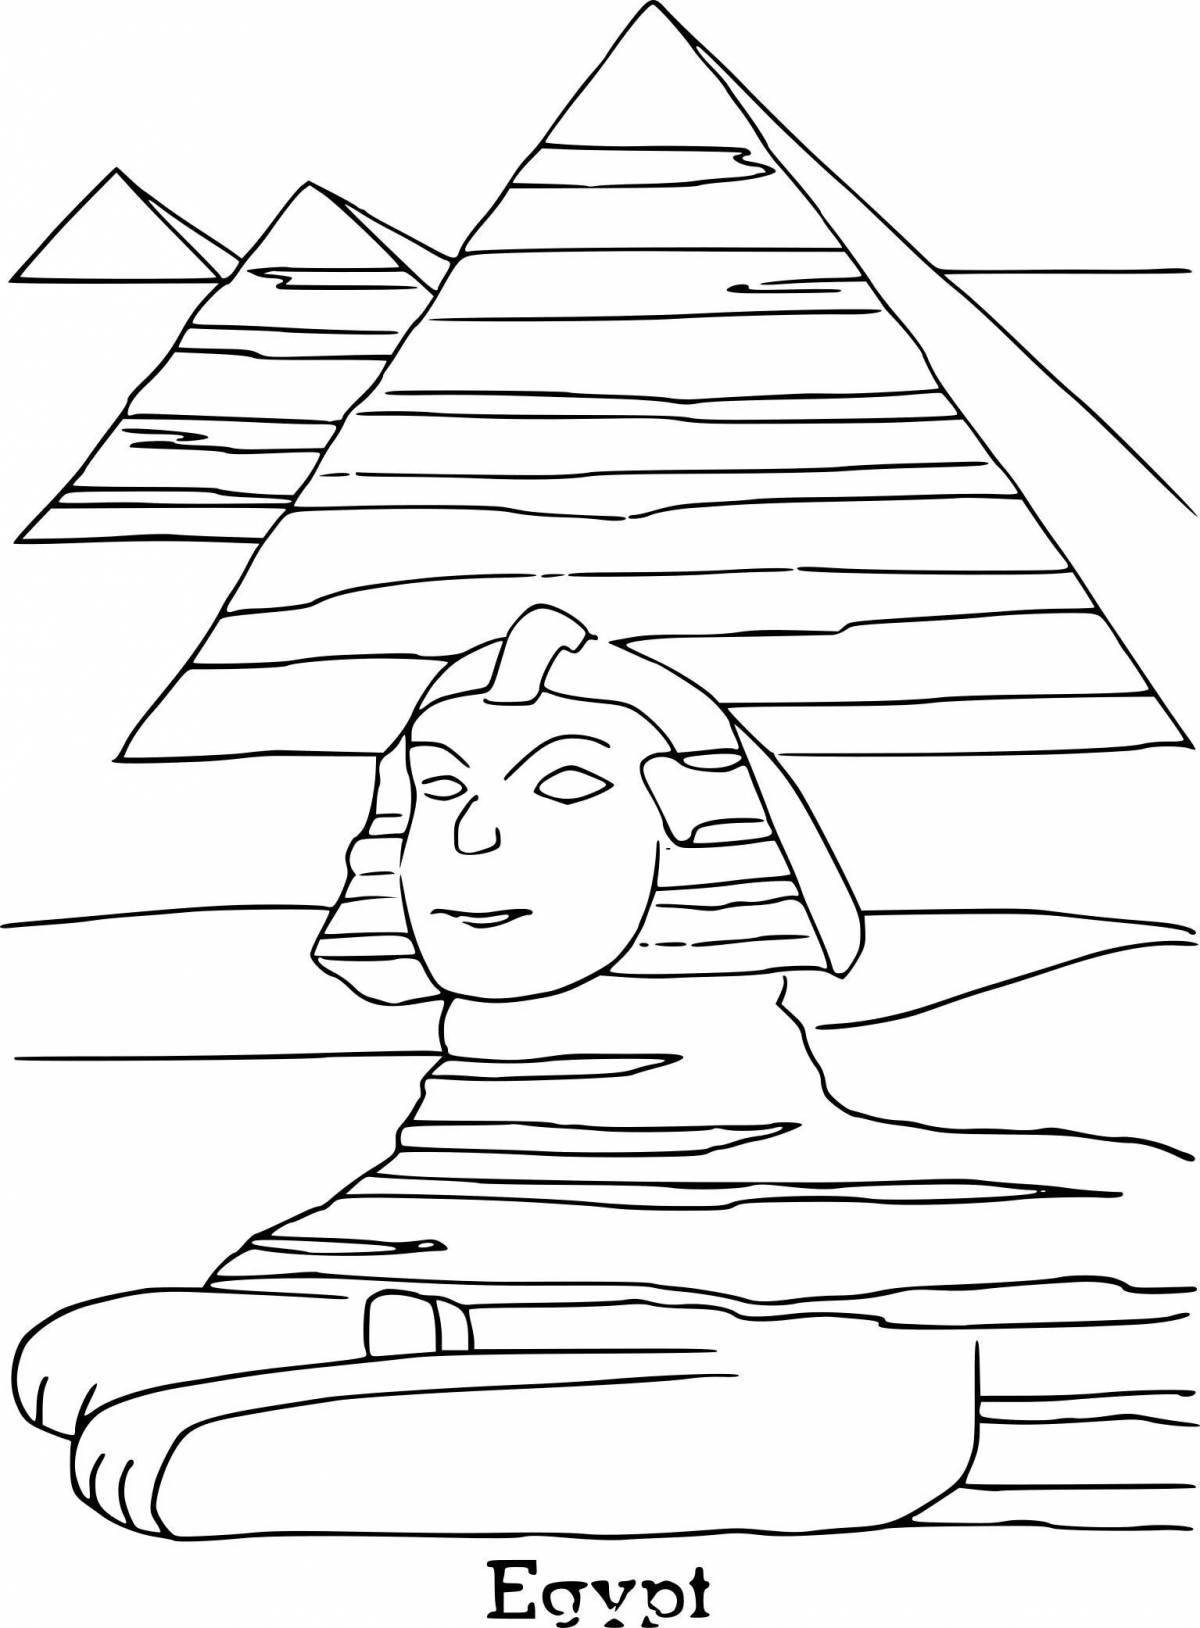 Great sphinx egypt coloring book